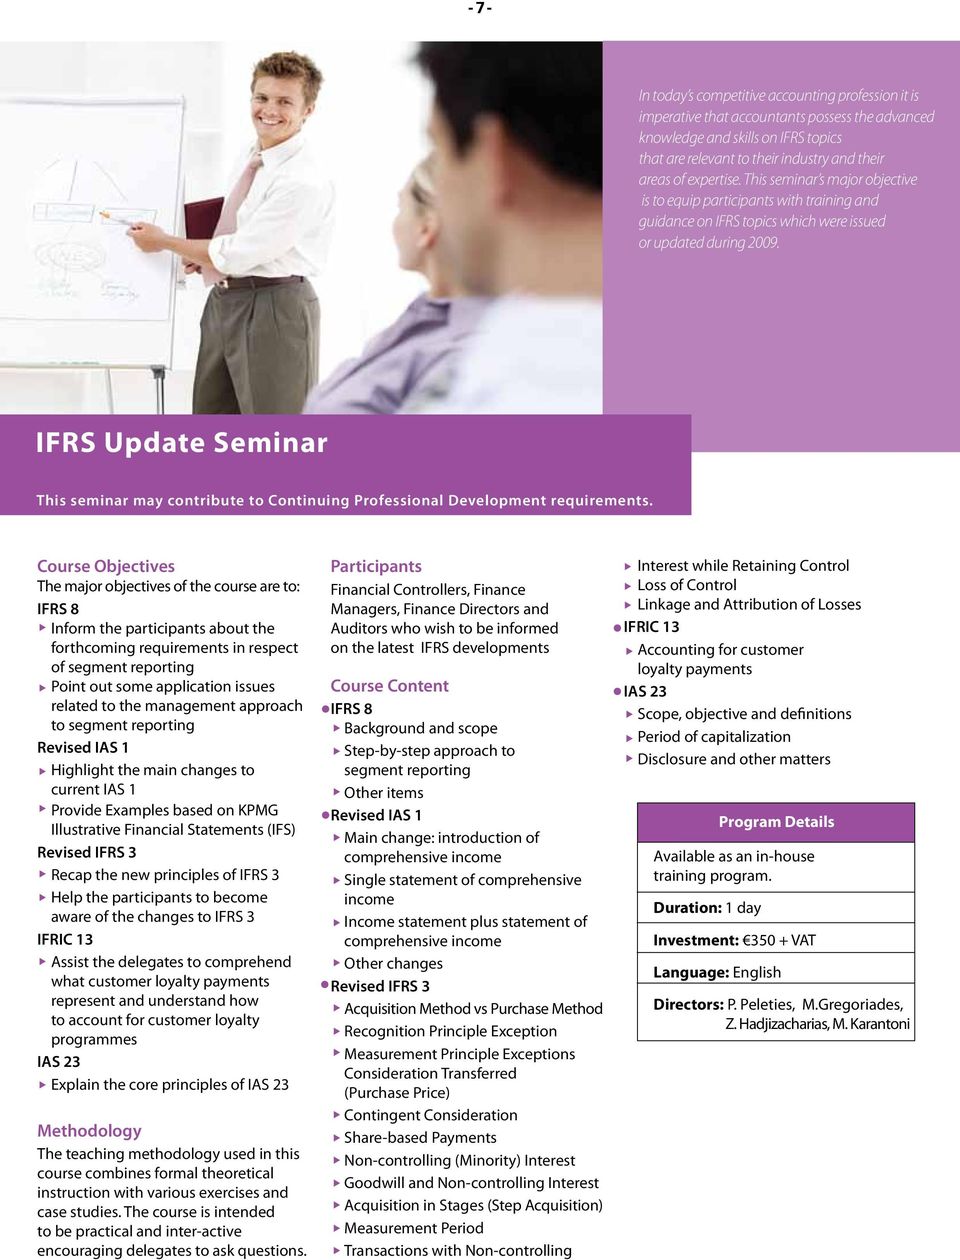 IFRS Update Seminar This seminar may contribute to Continuing Professional Development requirements.